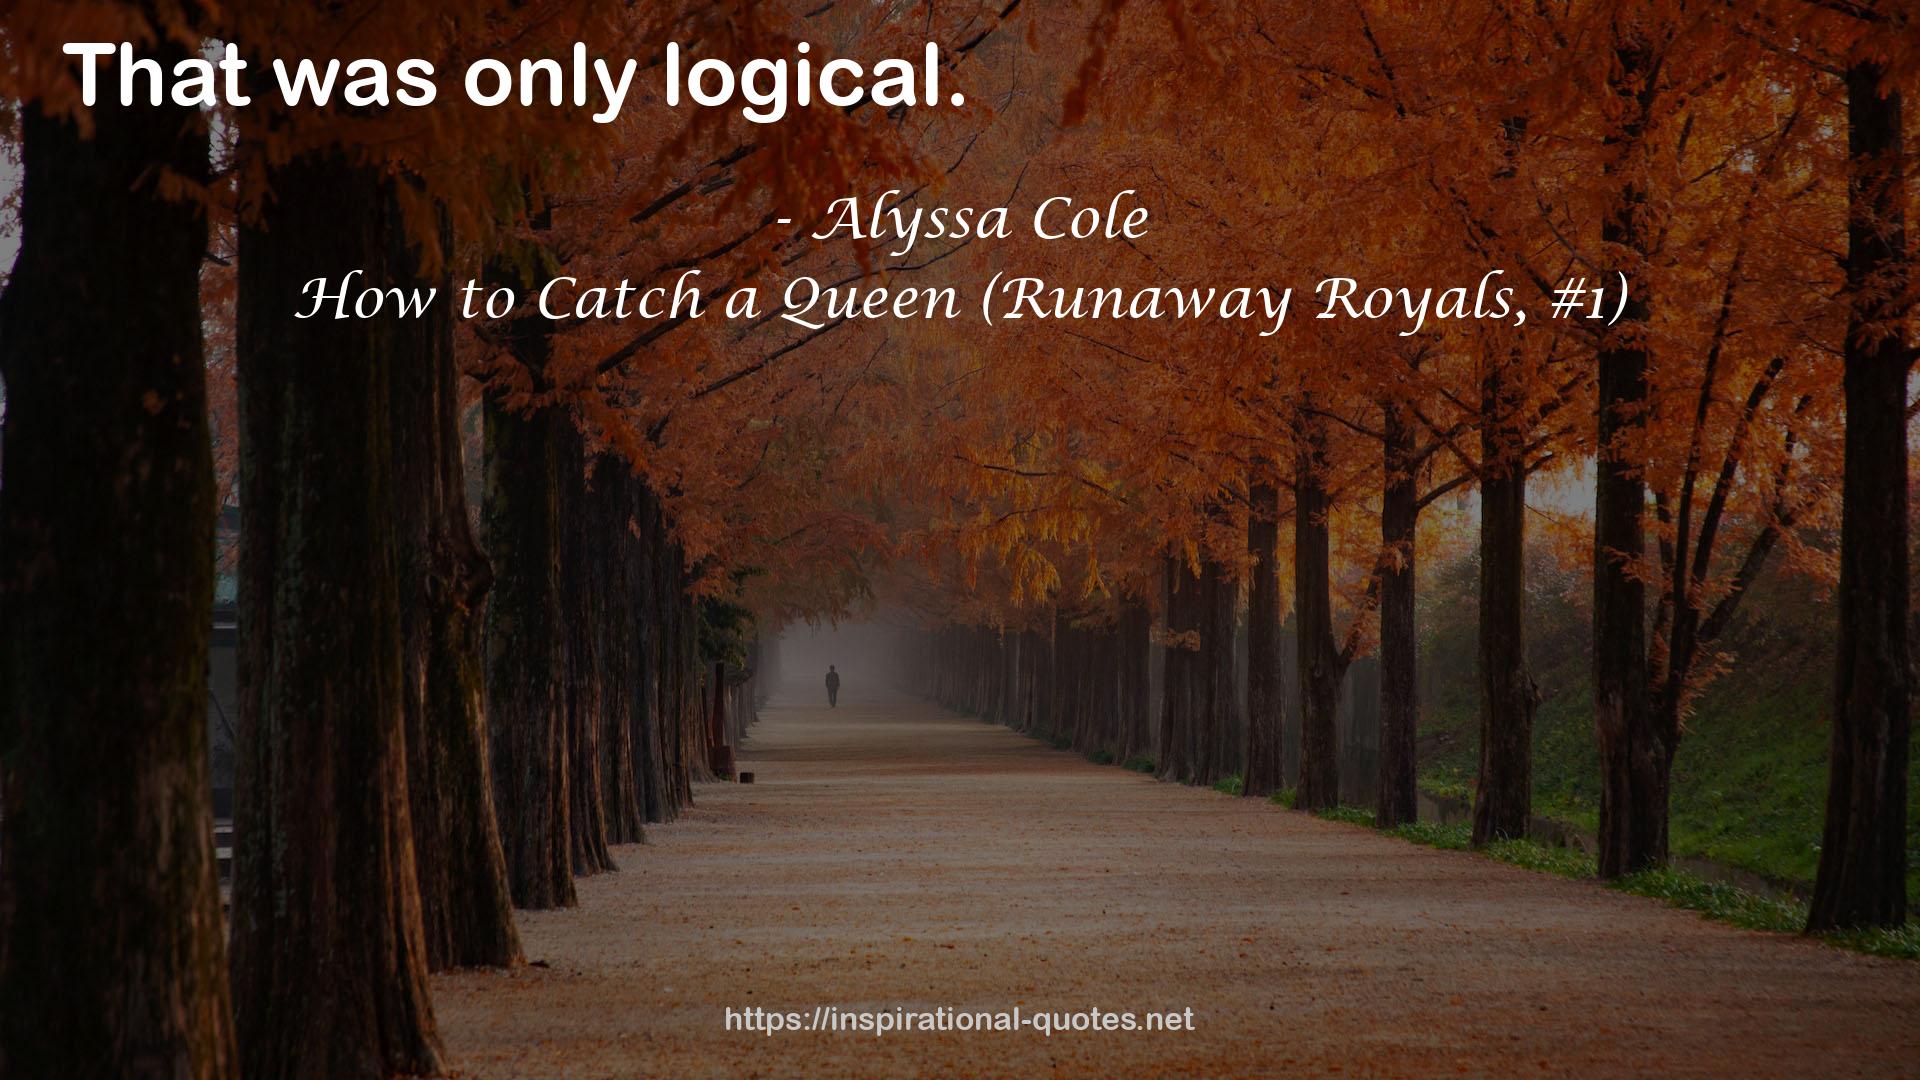 How to Catch a Queen (Runaway Royals, #1) QUOTES